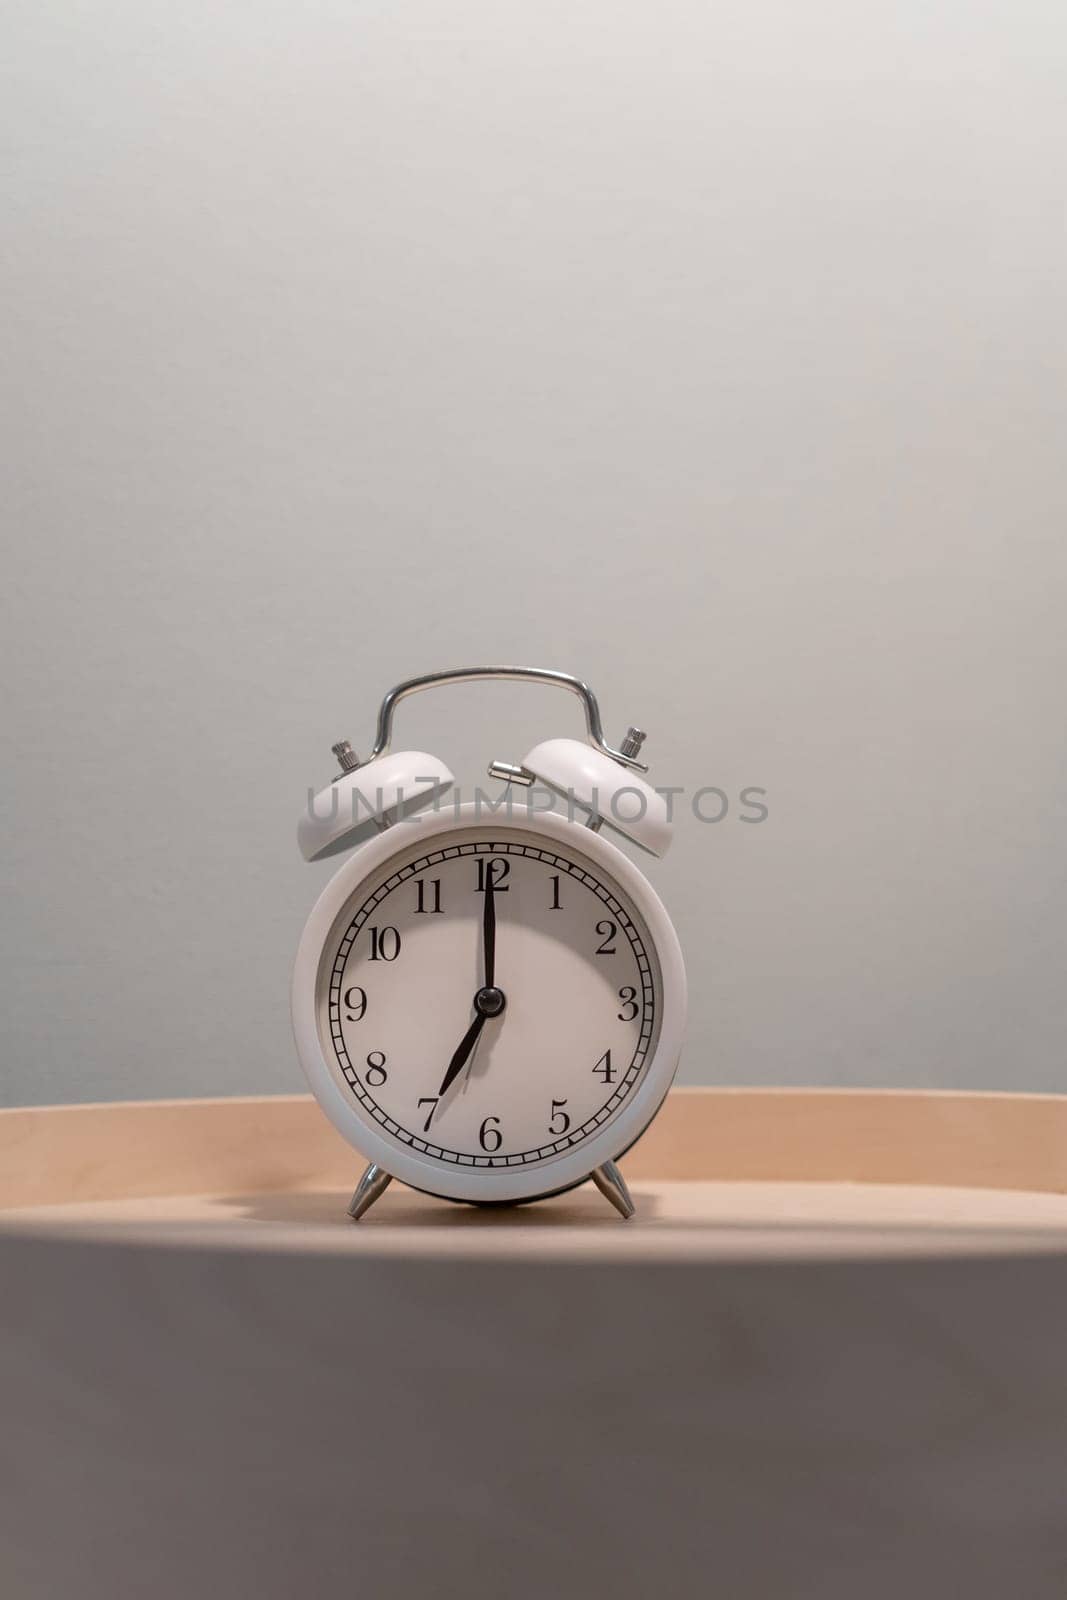 Close-up of a round white alarm clock on a table in the bedroom. The hands on the clock show seven o'clock in the morning, time to get up. Retro alarm clock on the table, vintage tone. space for text